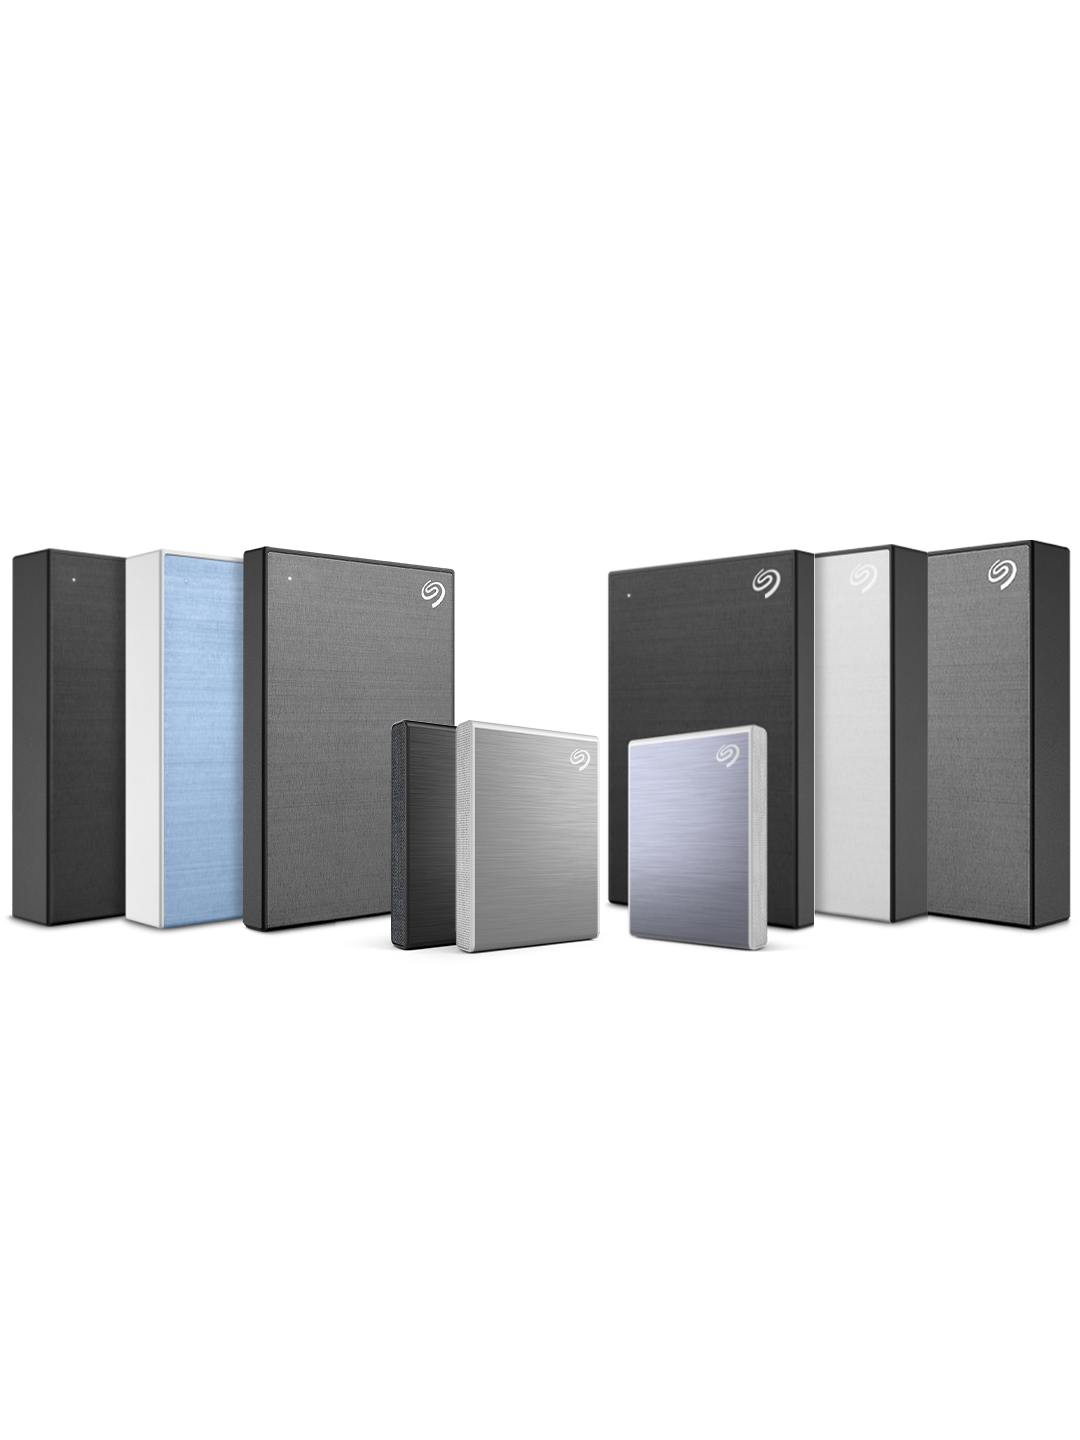 one-touch-external-drives-row4-image.png